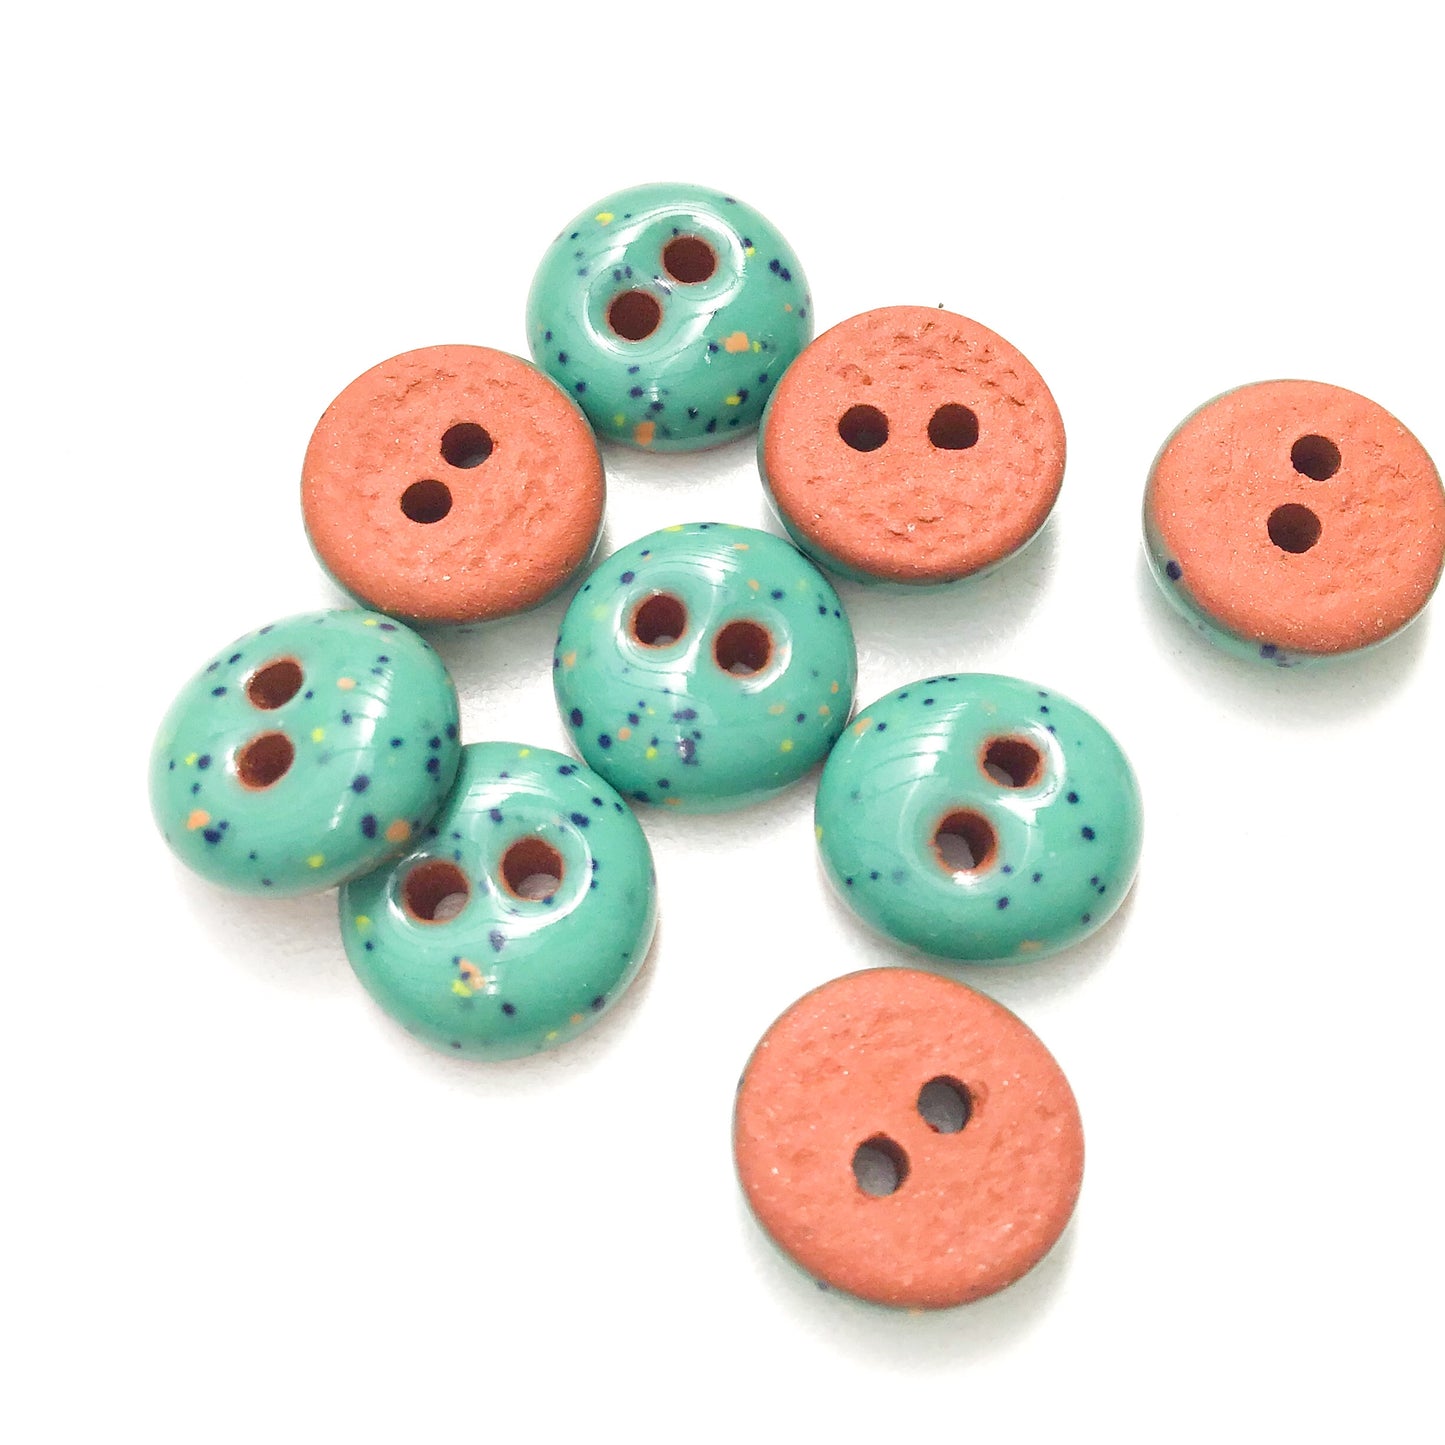 Speckled Turquoise Ceramic Buttons - Hand Made Clay Buttons - 7/16" - 9 Pack